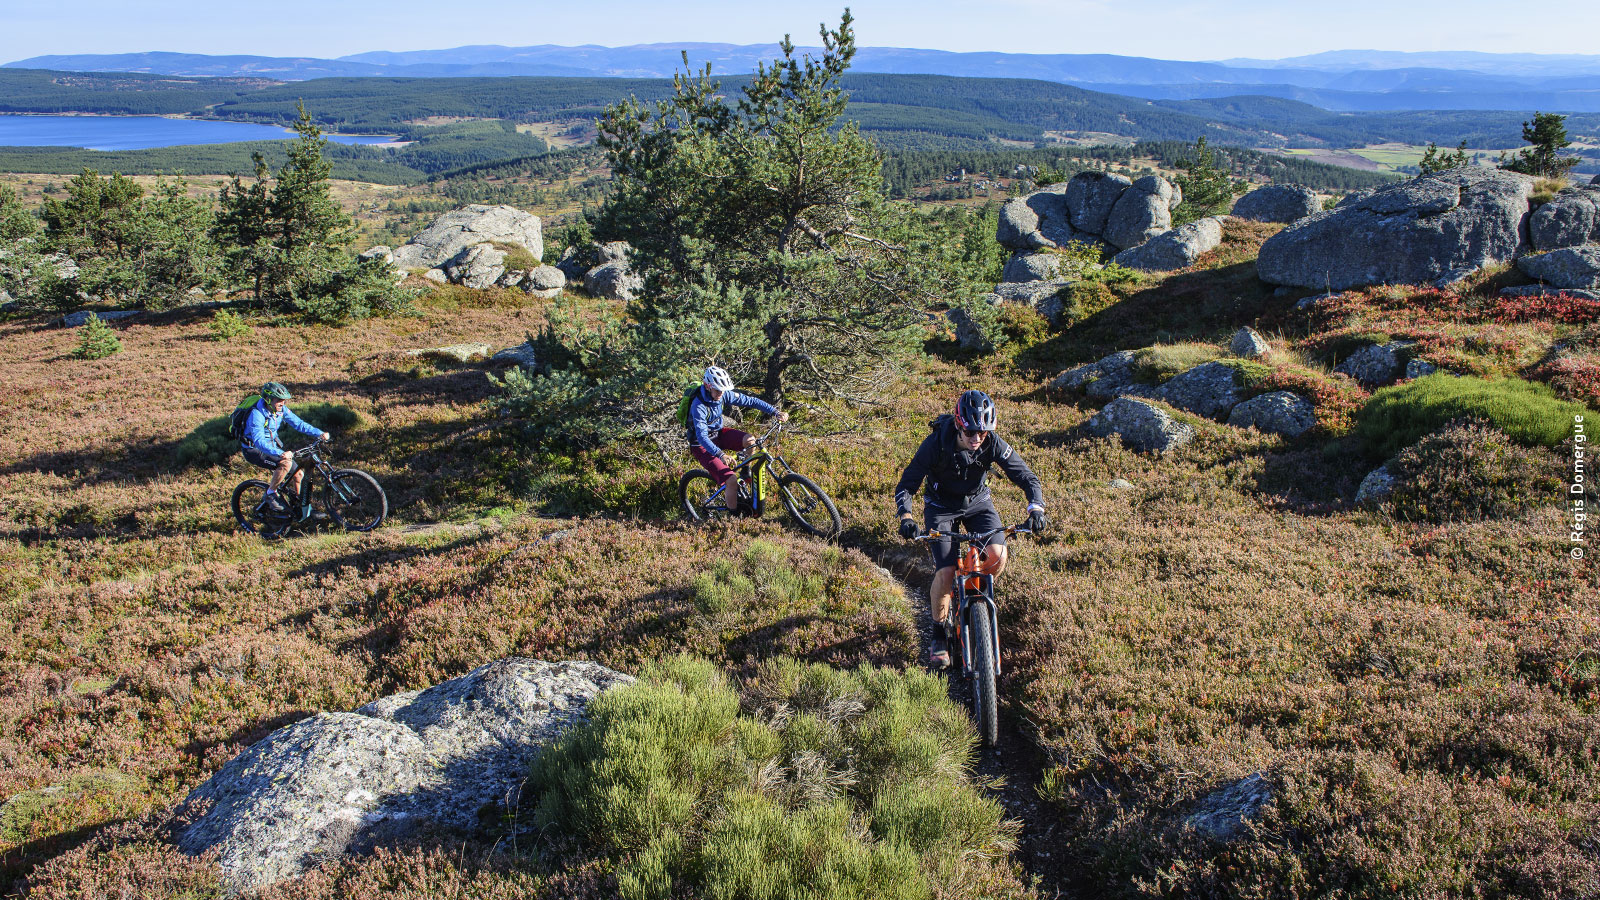 TO THE FOUR CORNERS OF LOZERE BY ELECTRIC MOUNTAIN BIKE